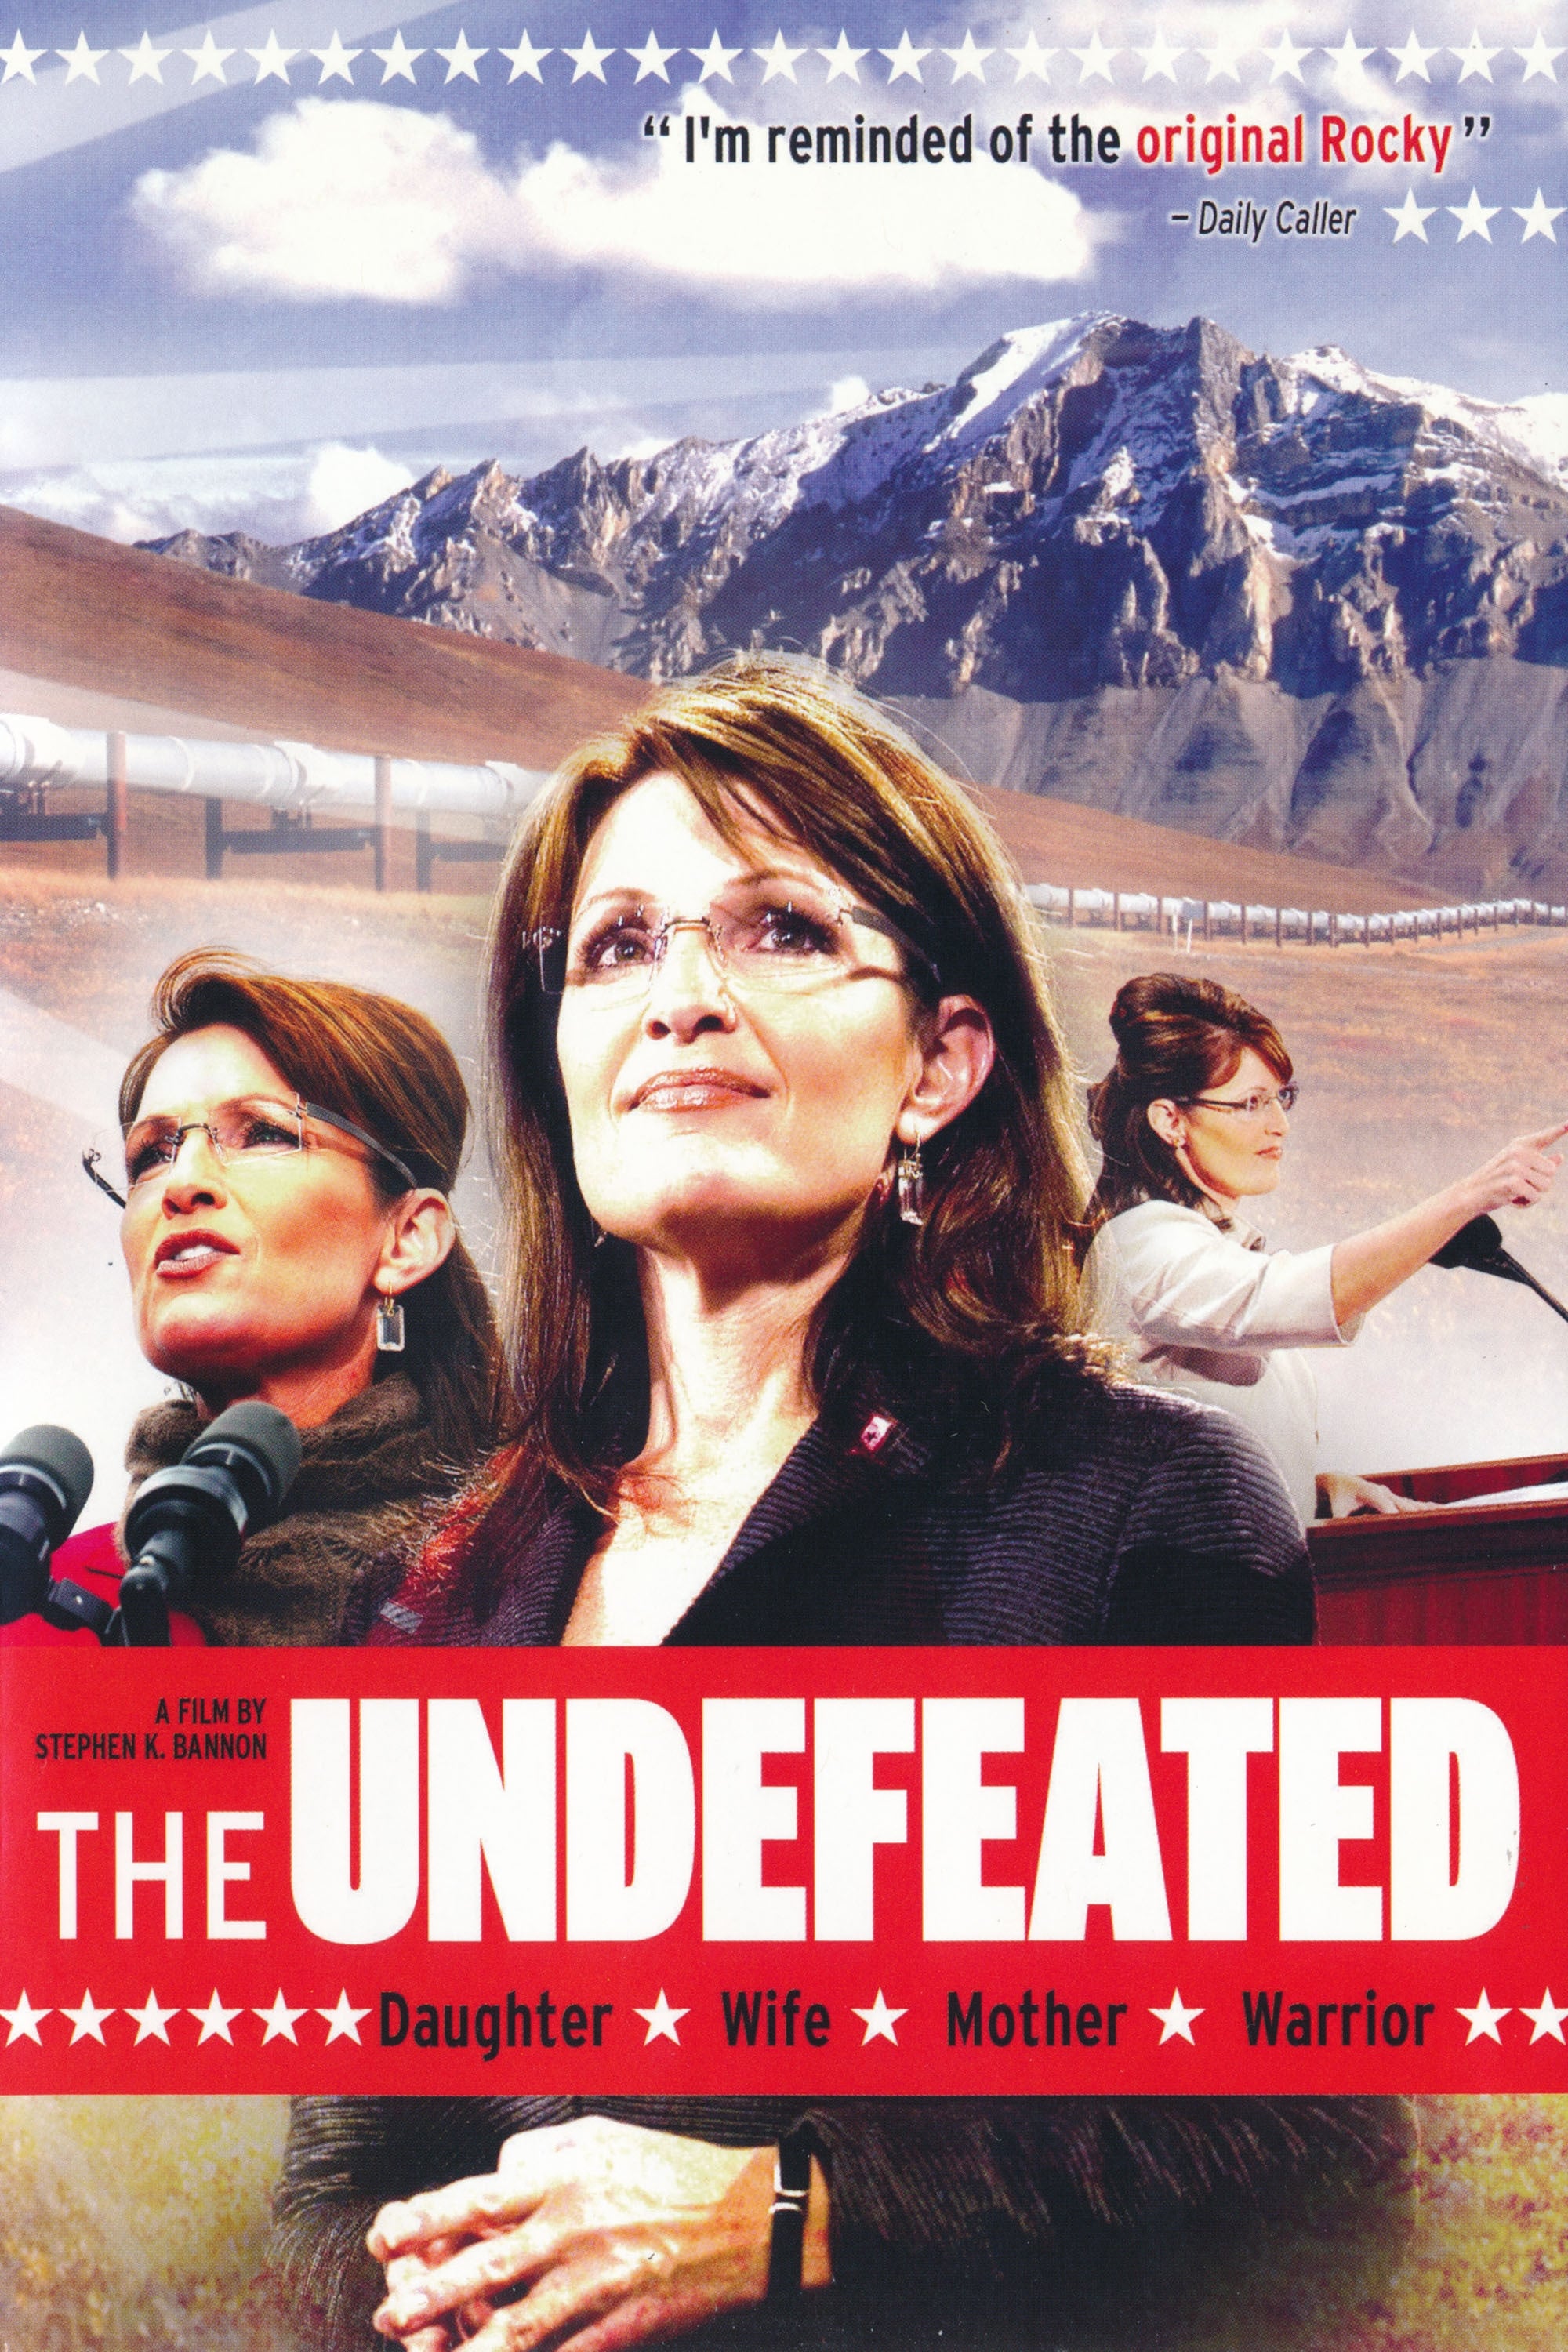 The Undefeated (2011)